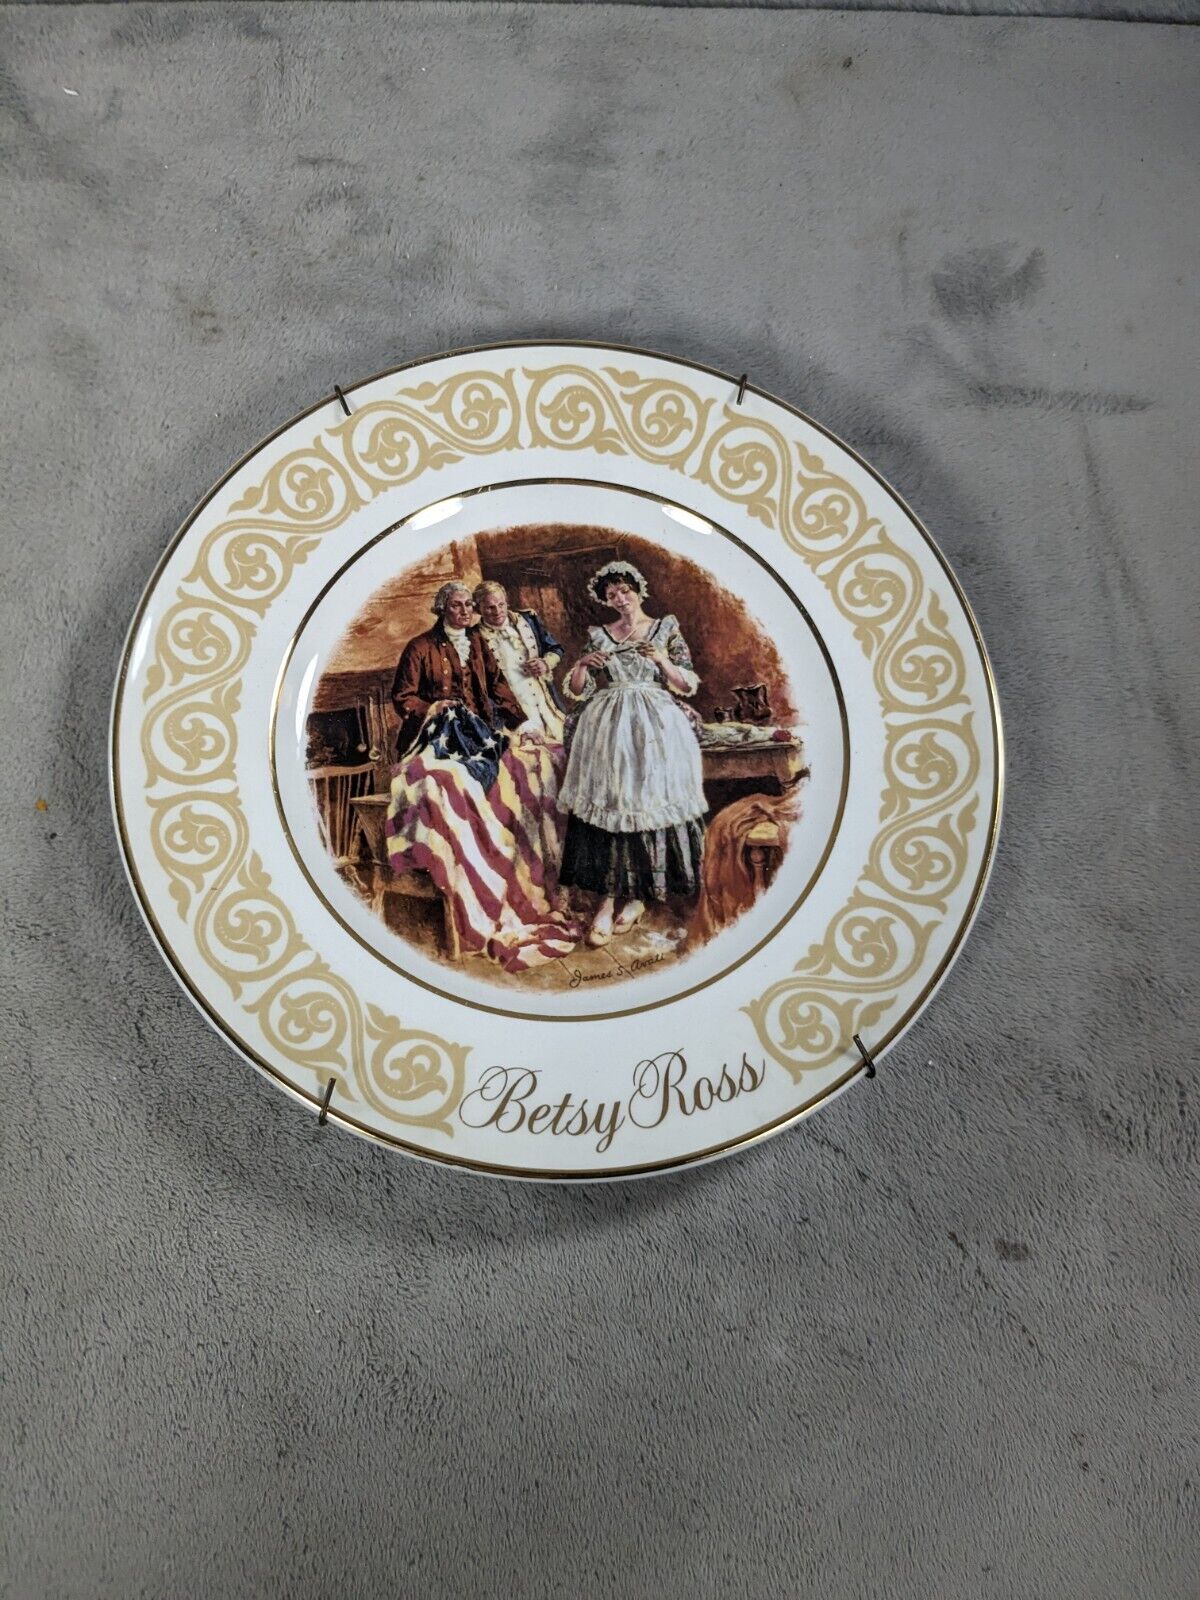 Betsy Ross Decorative Plate by Enoch Wedgwood Tunstall England for Avon 1973